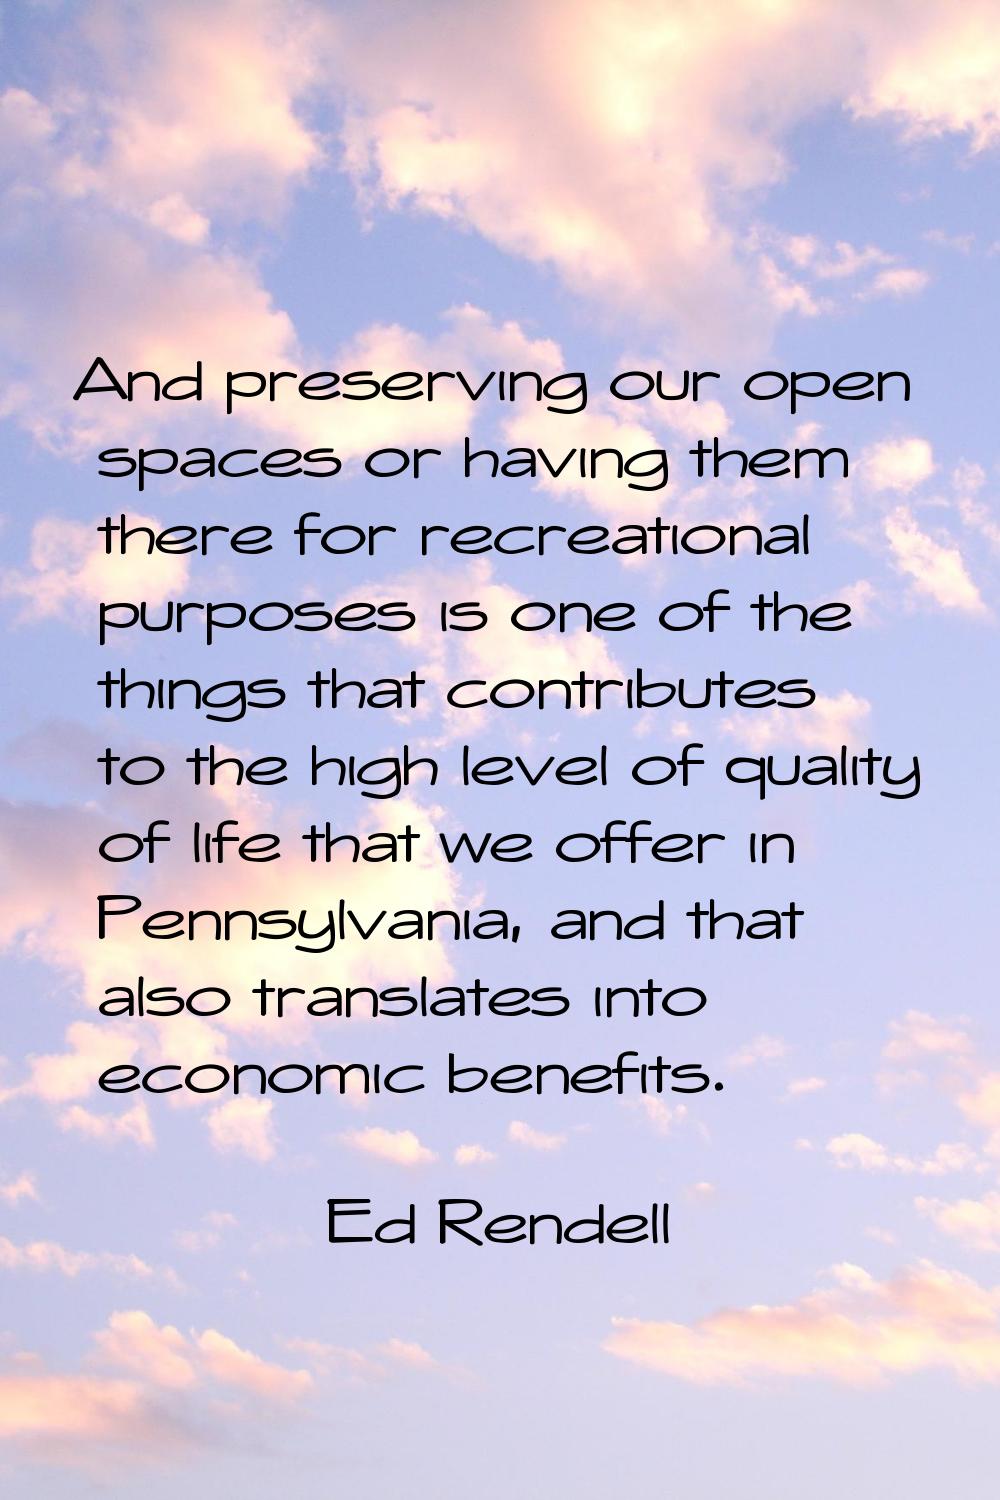 And preserving our open spaces or having them there for recreational purposes is one of the things 